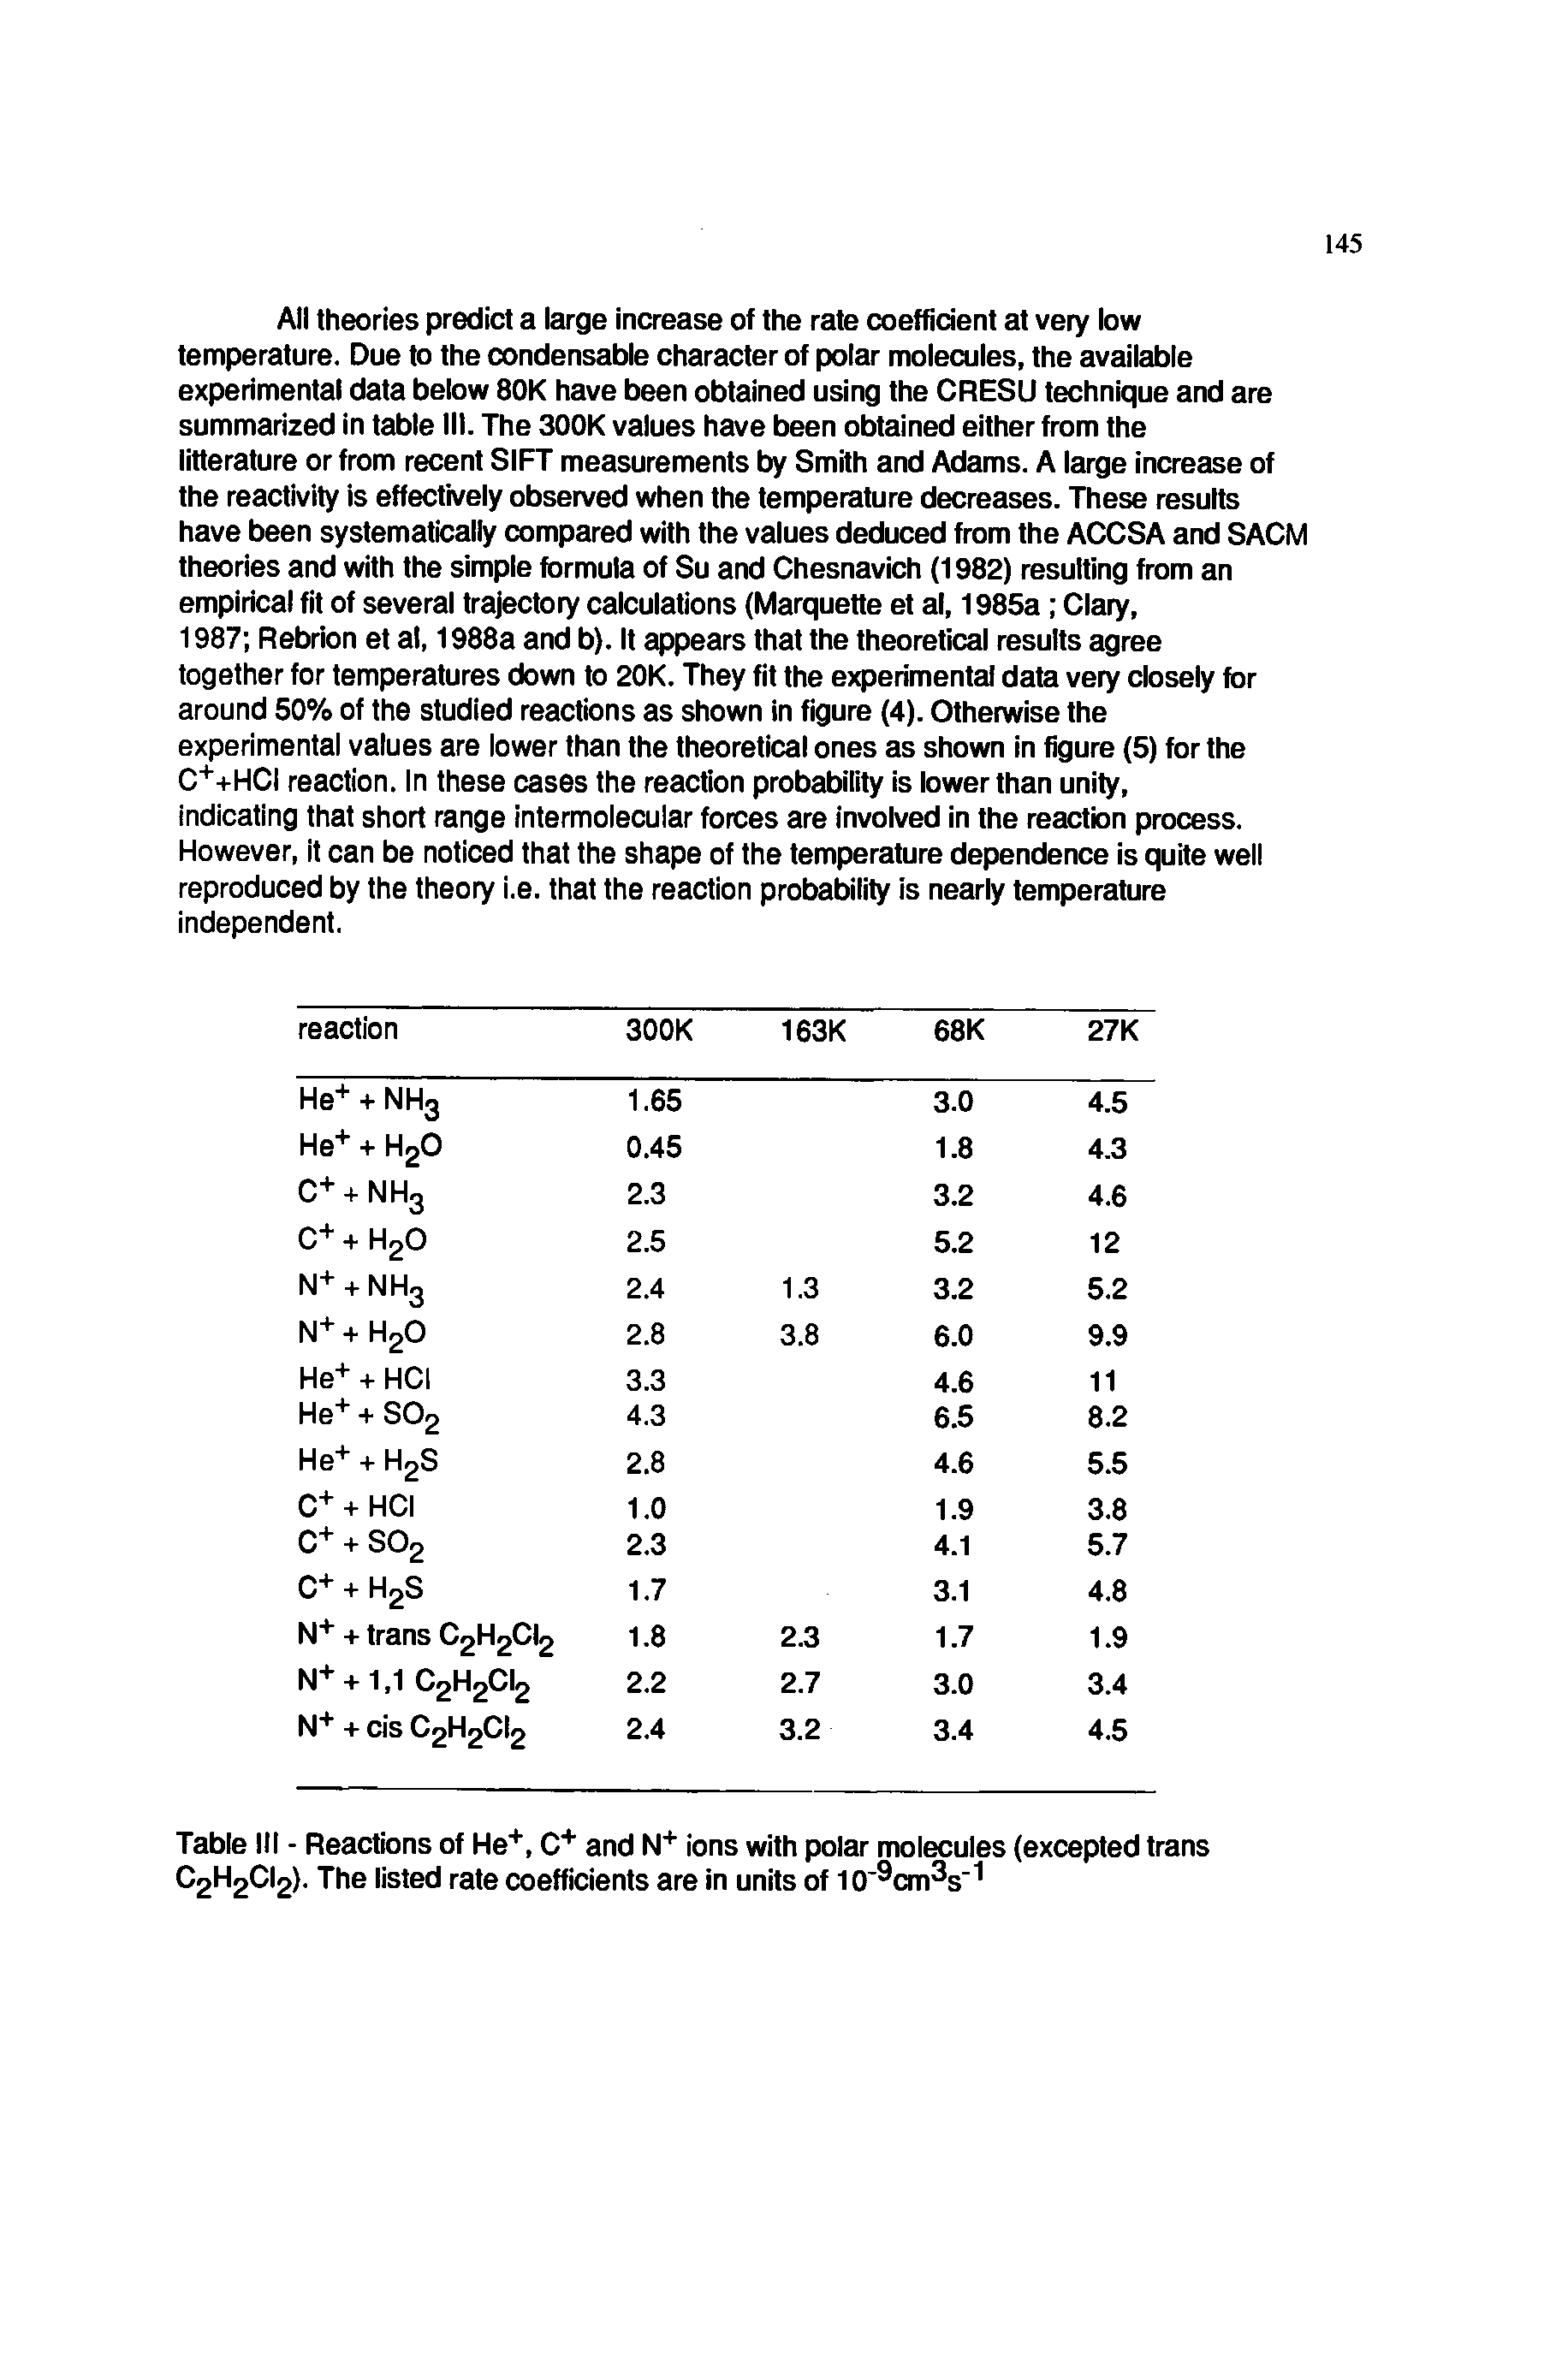 Table III - Reactions of He, C and N ions with polar molecules (excepted trans C2H2CI2). The listed rate coefficients are in units of lO cm s" ...